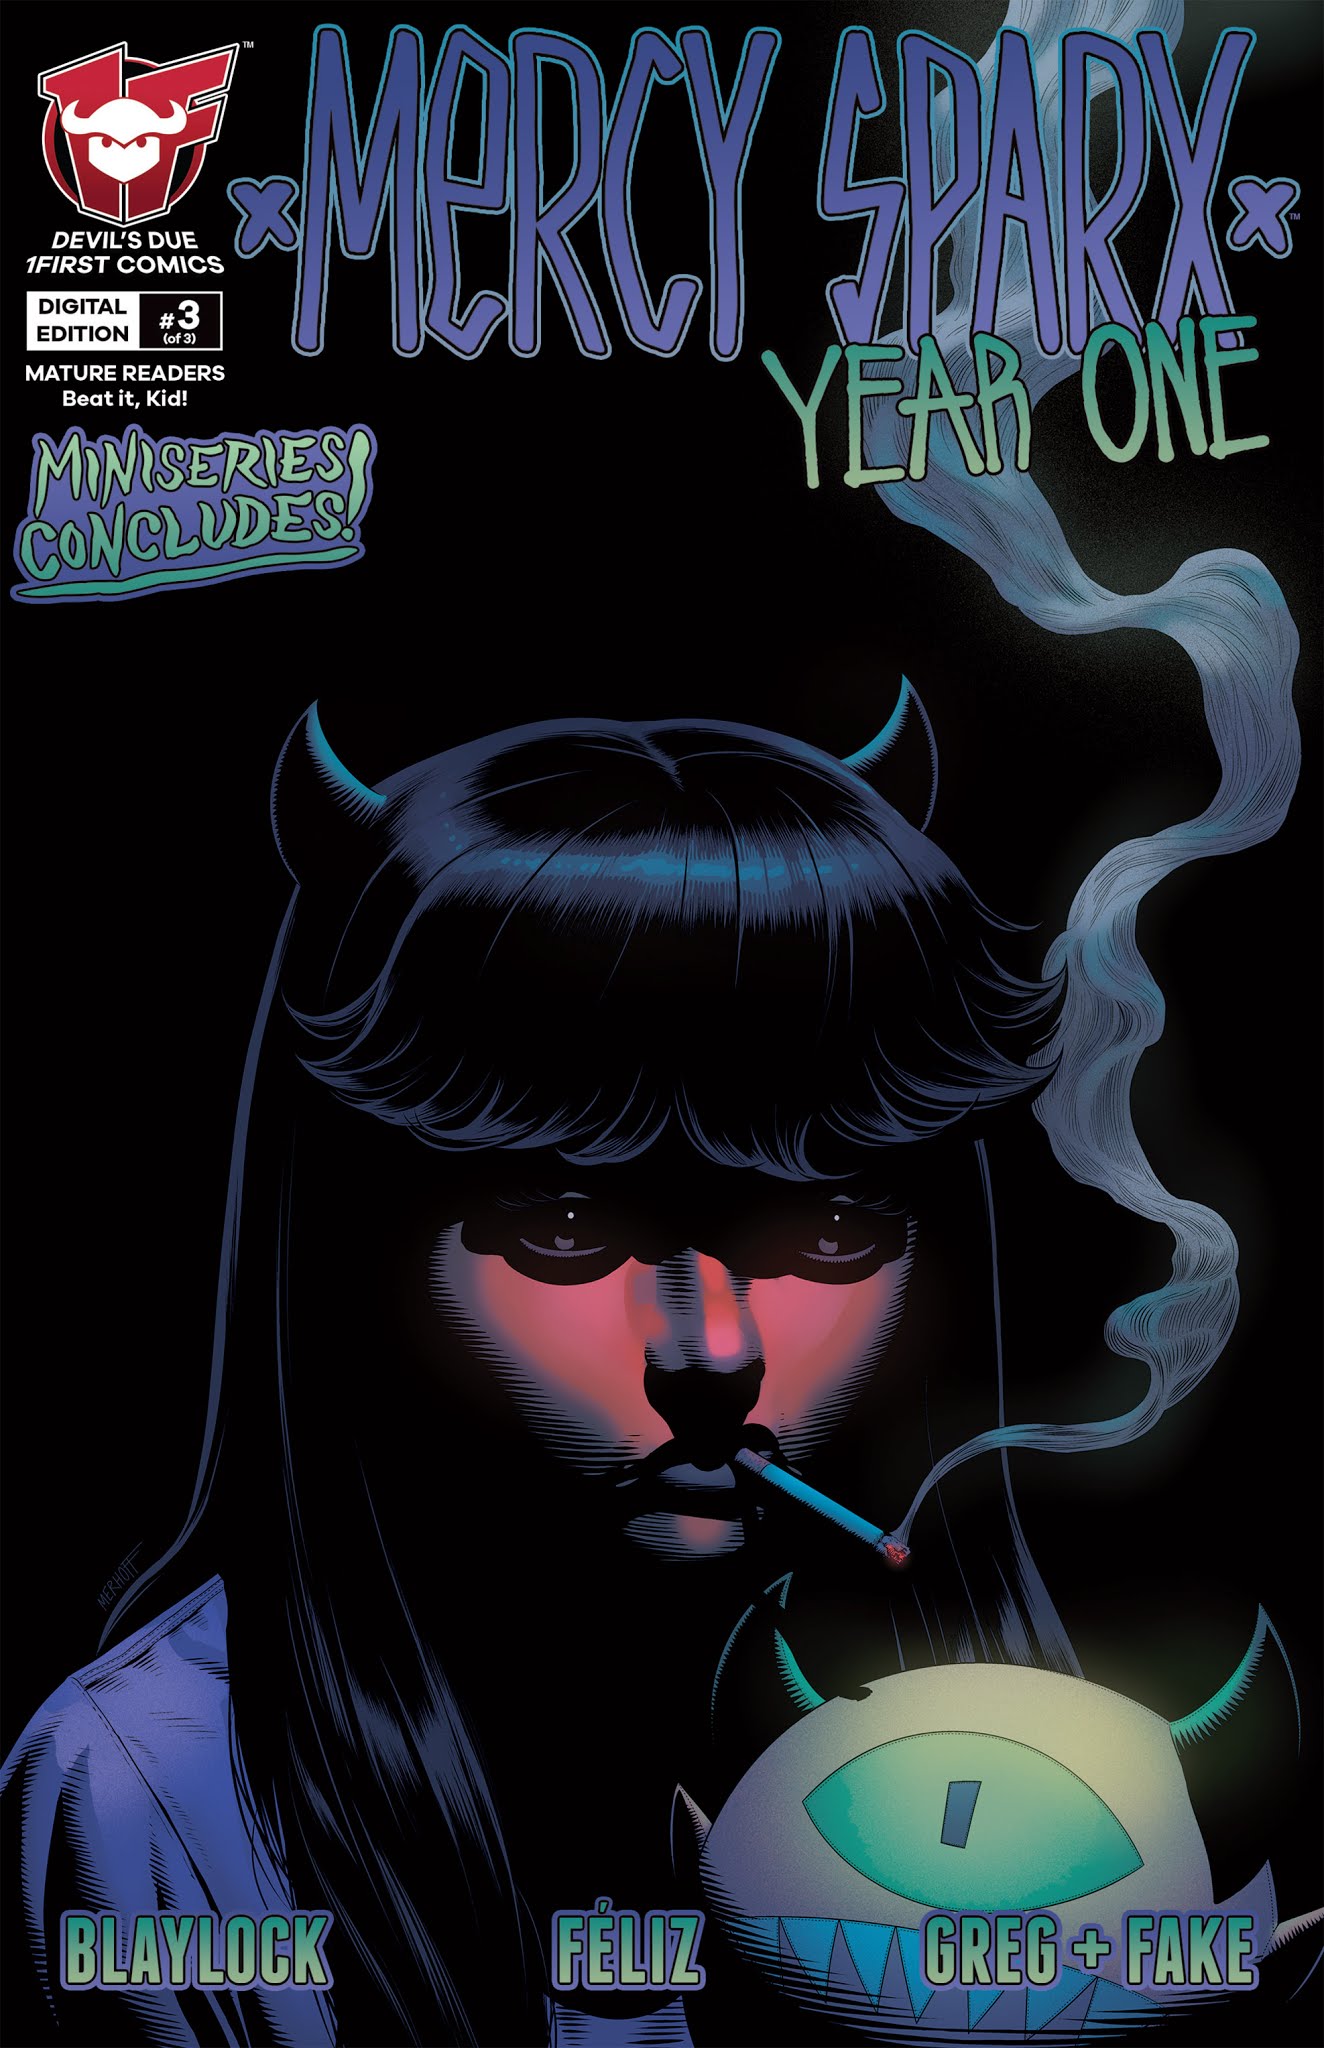 Read online Mercy Sparx Year One comic -  Issue #3 - 1